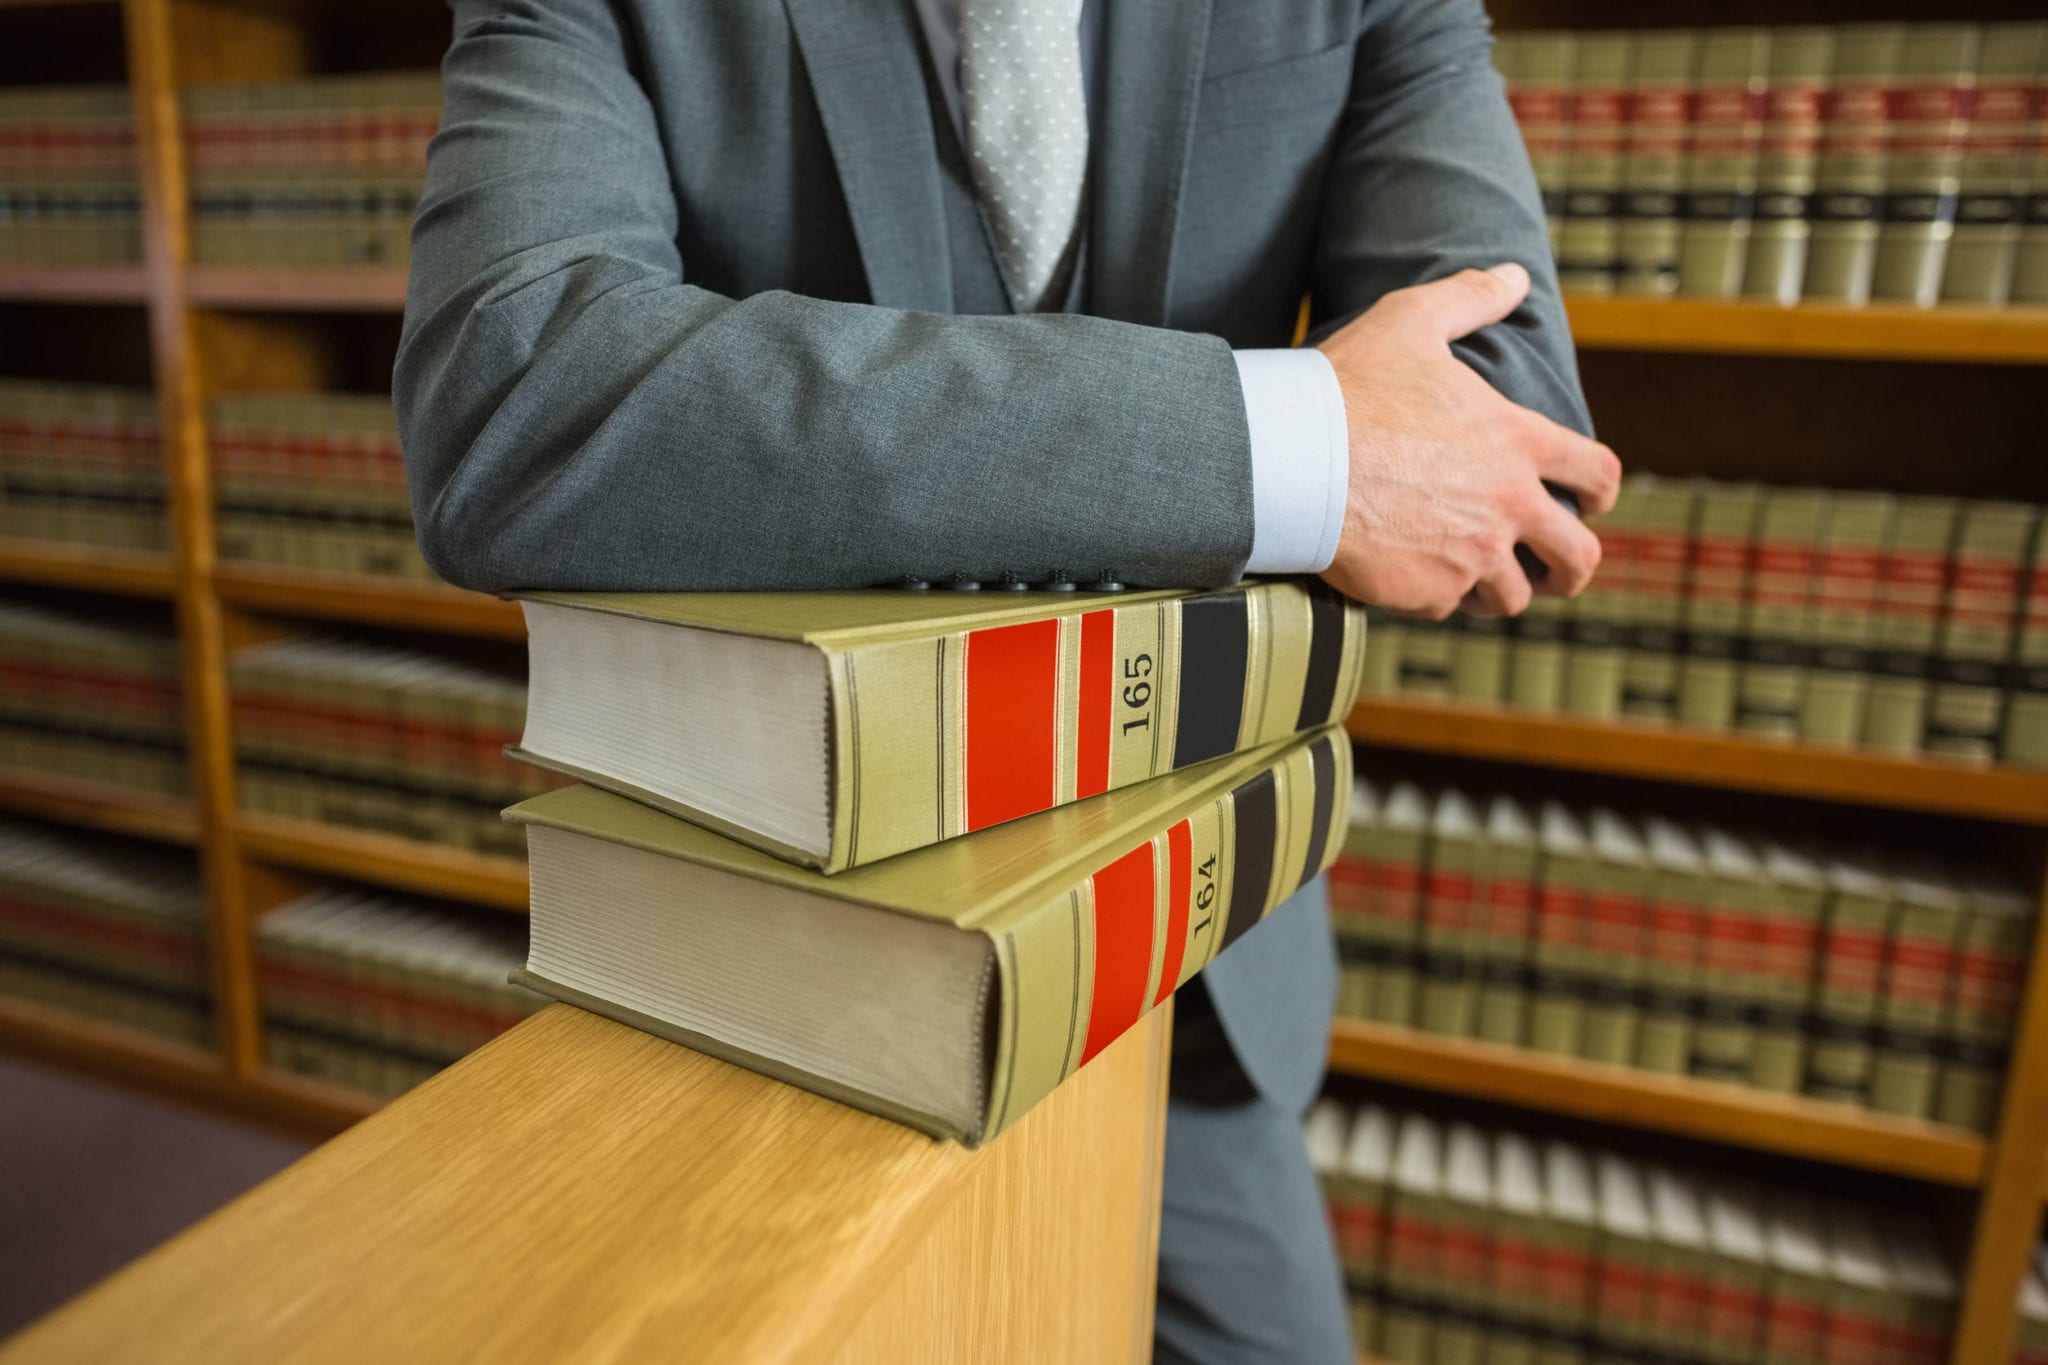 If You Are Charged with Robbery, Reach Out to a North Carolina Criminal Defense Lawyer